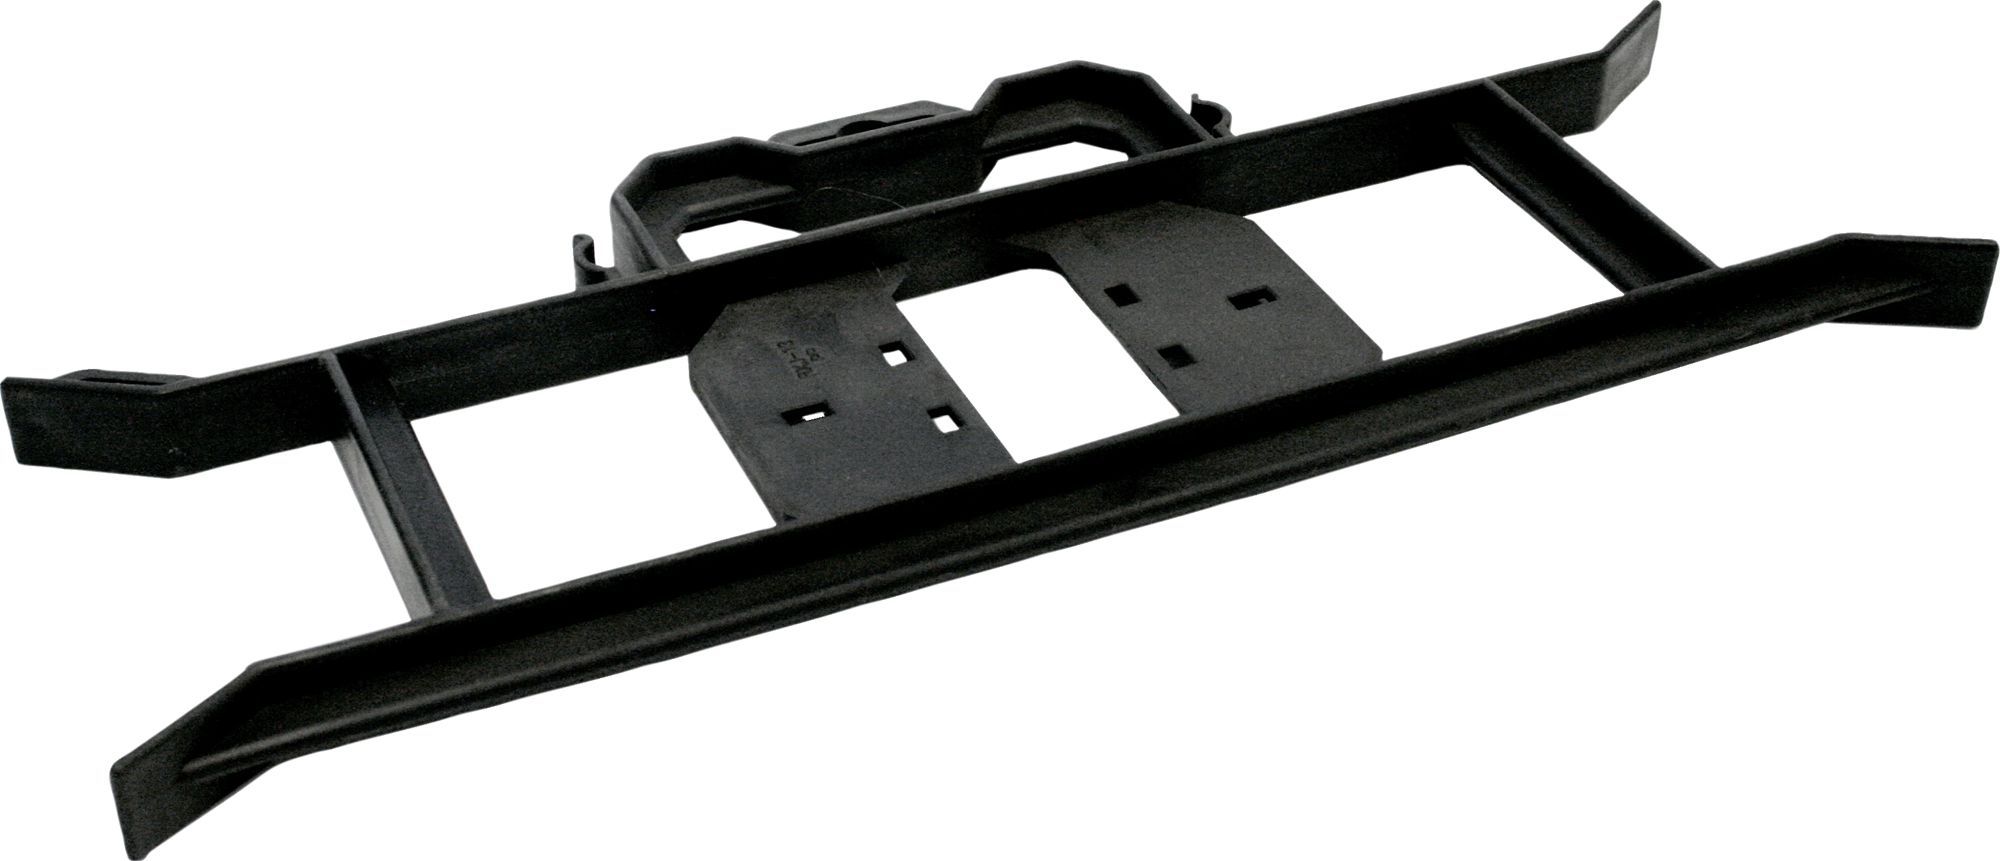 Masterplug Cable carrier, Black